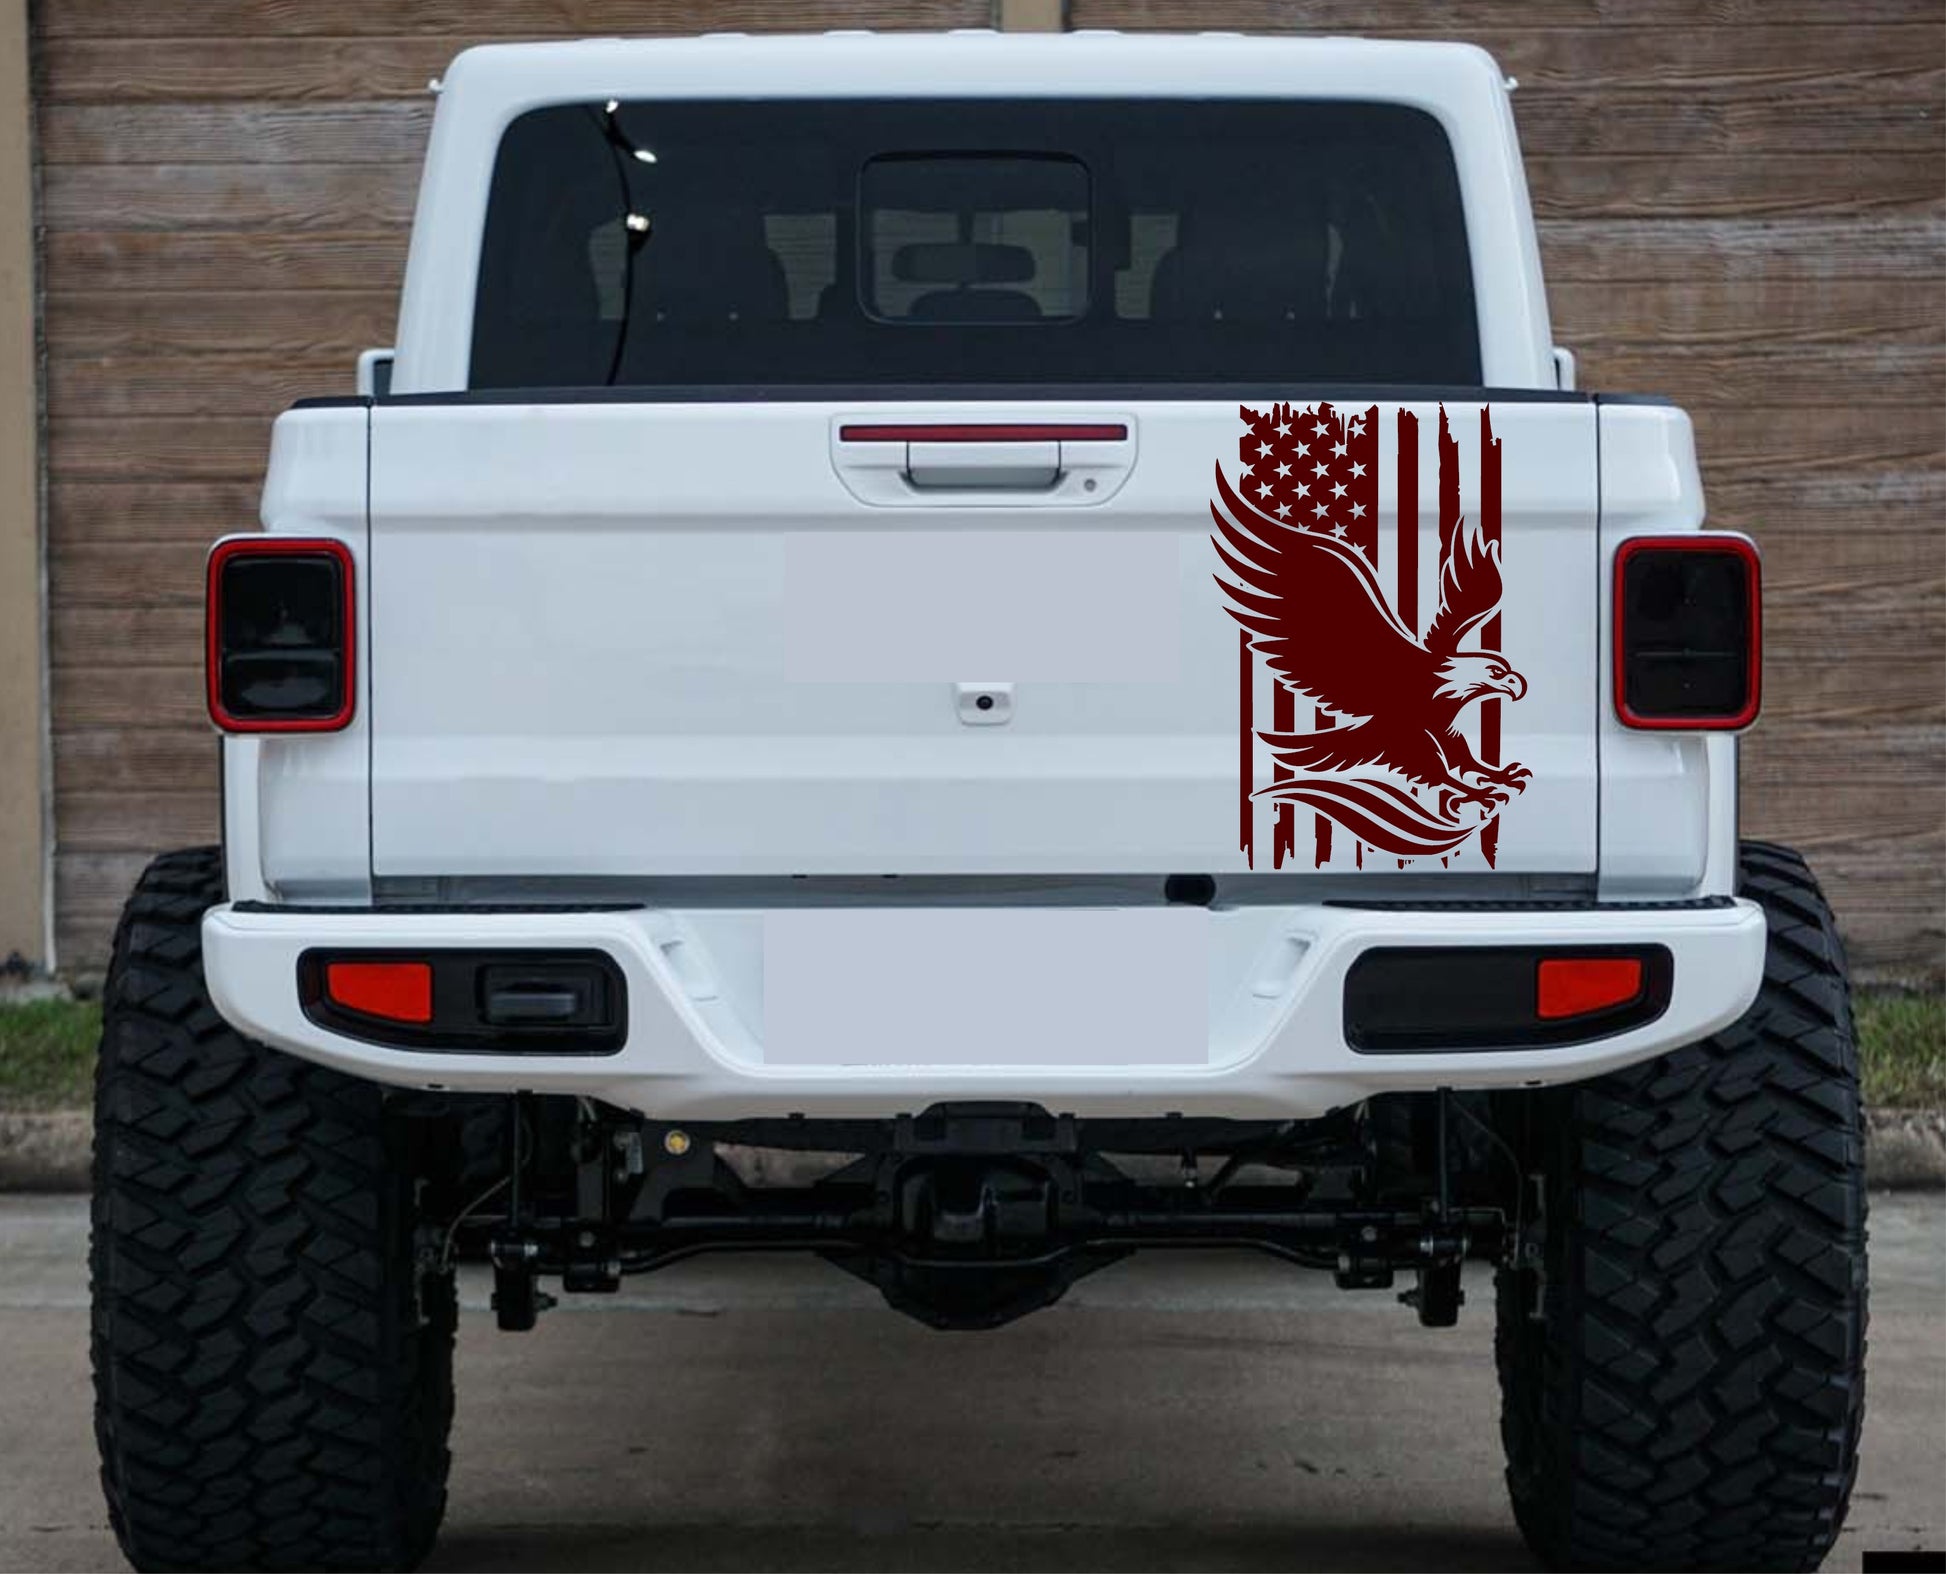 american flag american eagle car sticker fits jeep gladiator tailgate